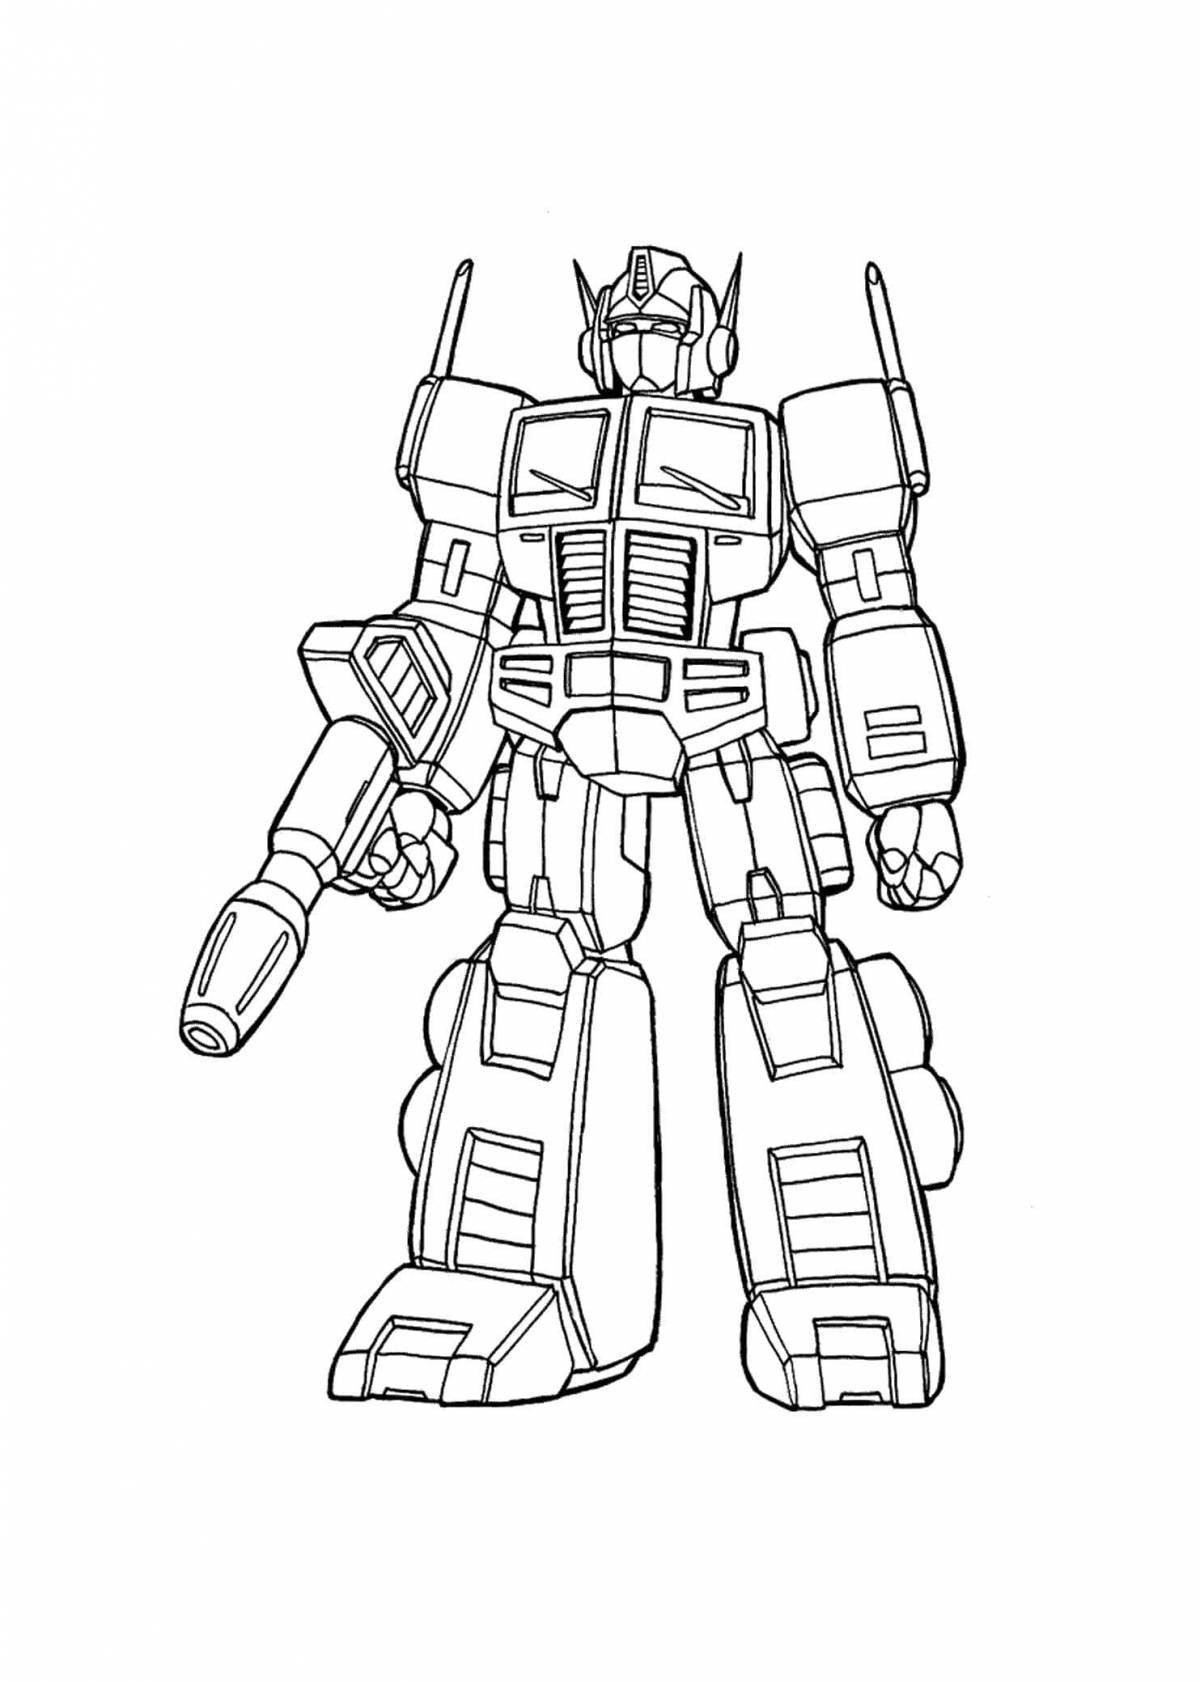 Funny transformers coloring pages for boys